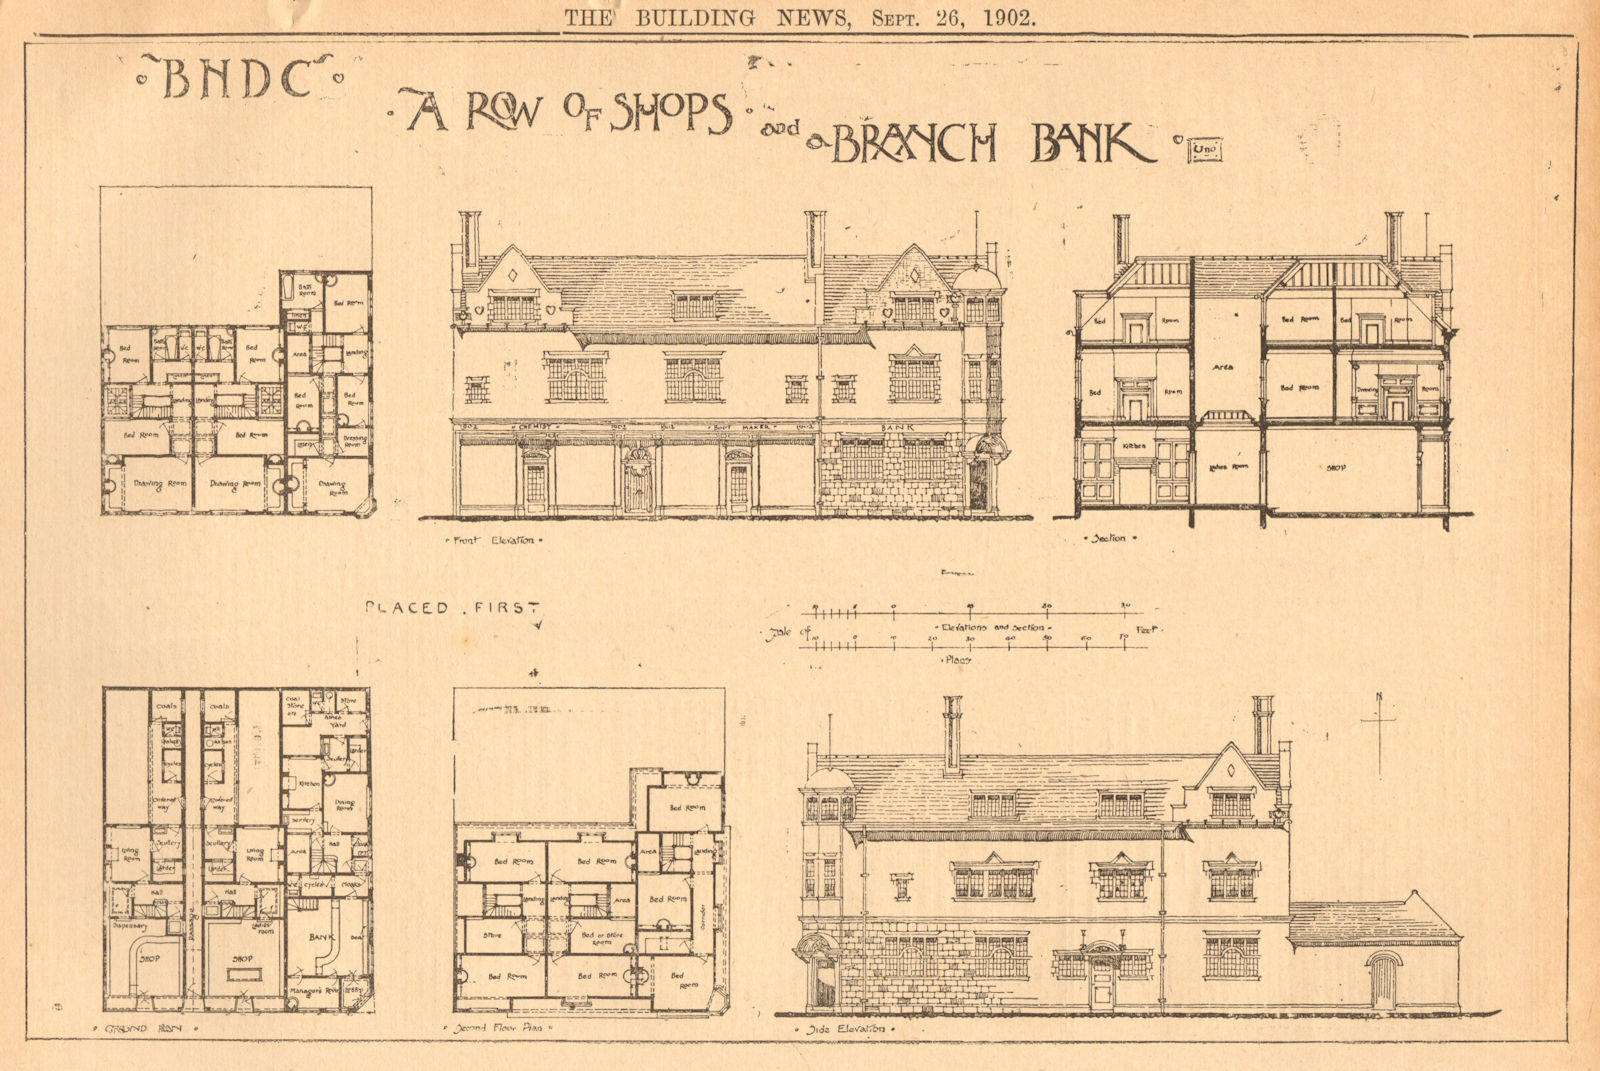 A row of shops & a branch bank. Plans, front & side elevations 1902 old print